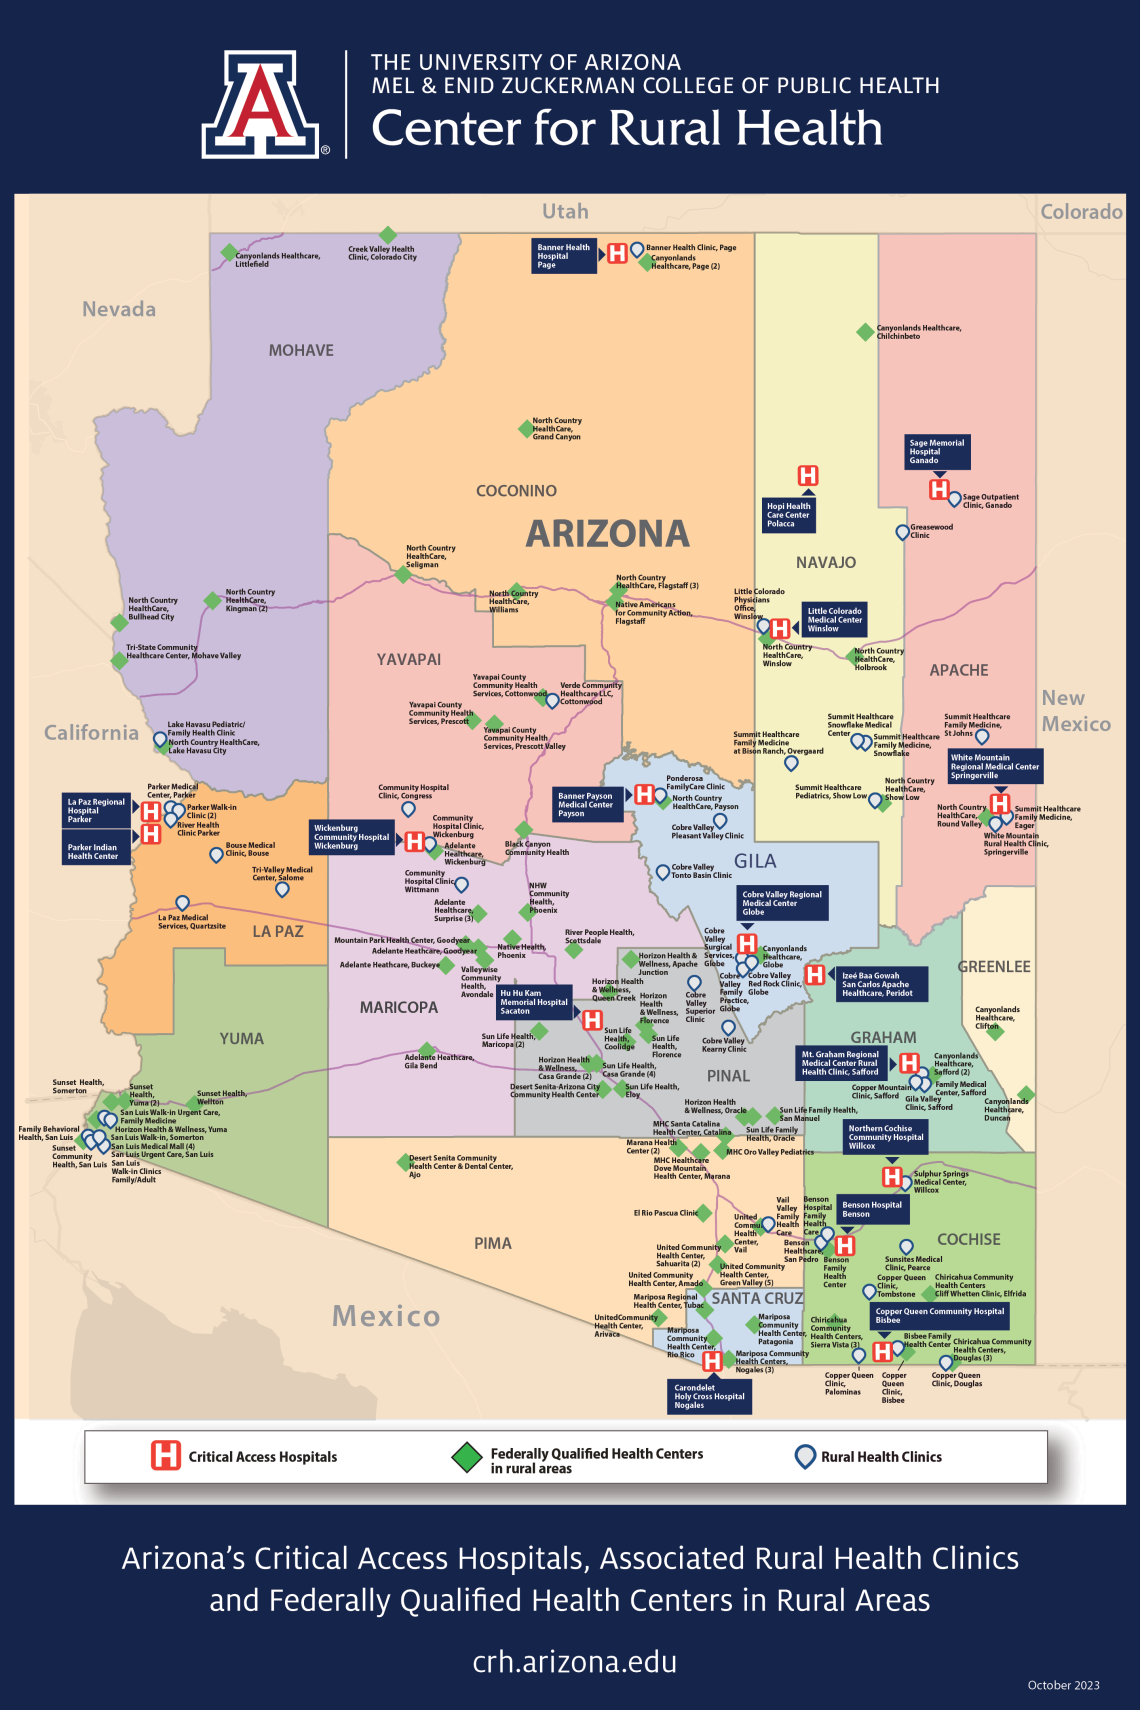 Arizona Critical Access Hospitals, Rural Health Clinics and Federally Qualified Health Centers (2023 update)